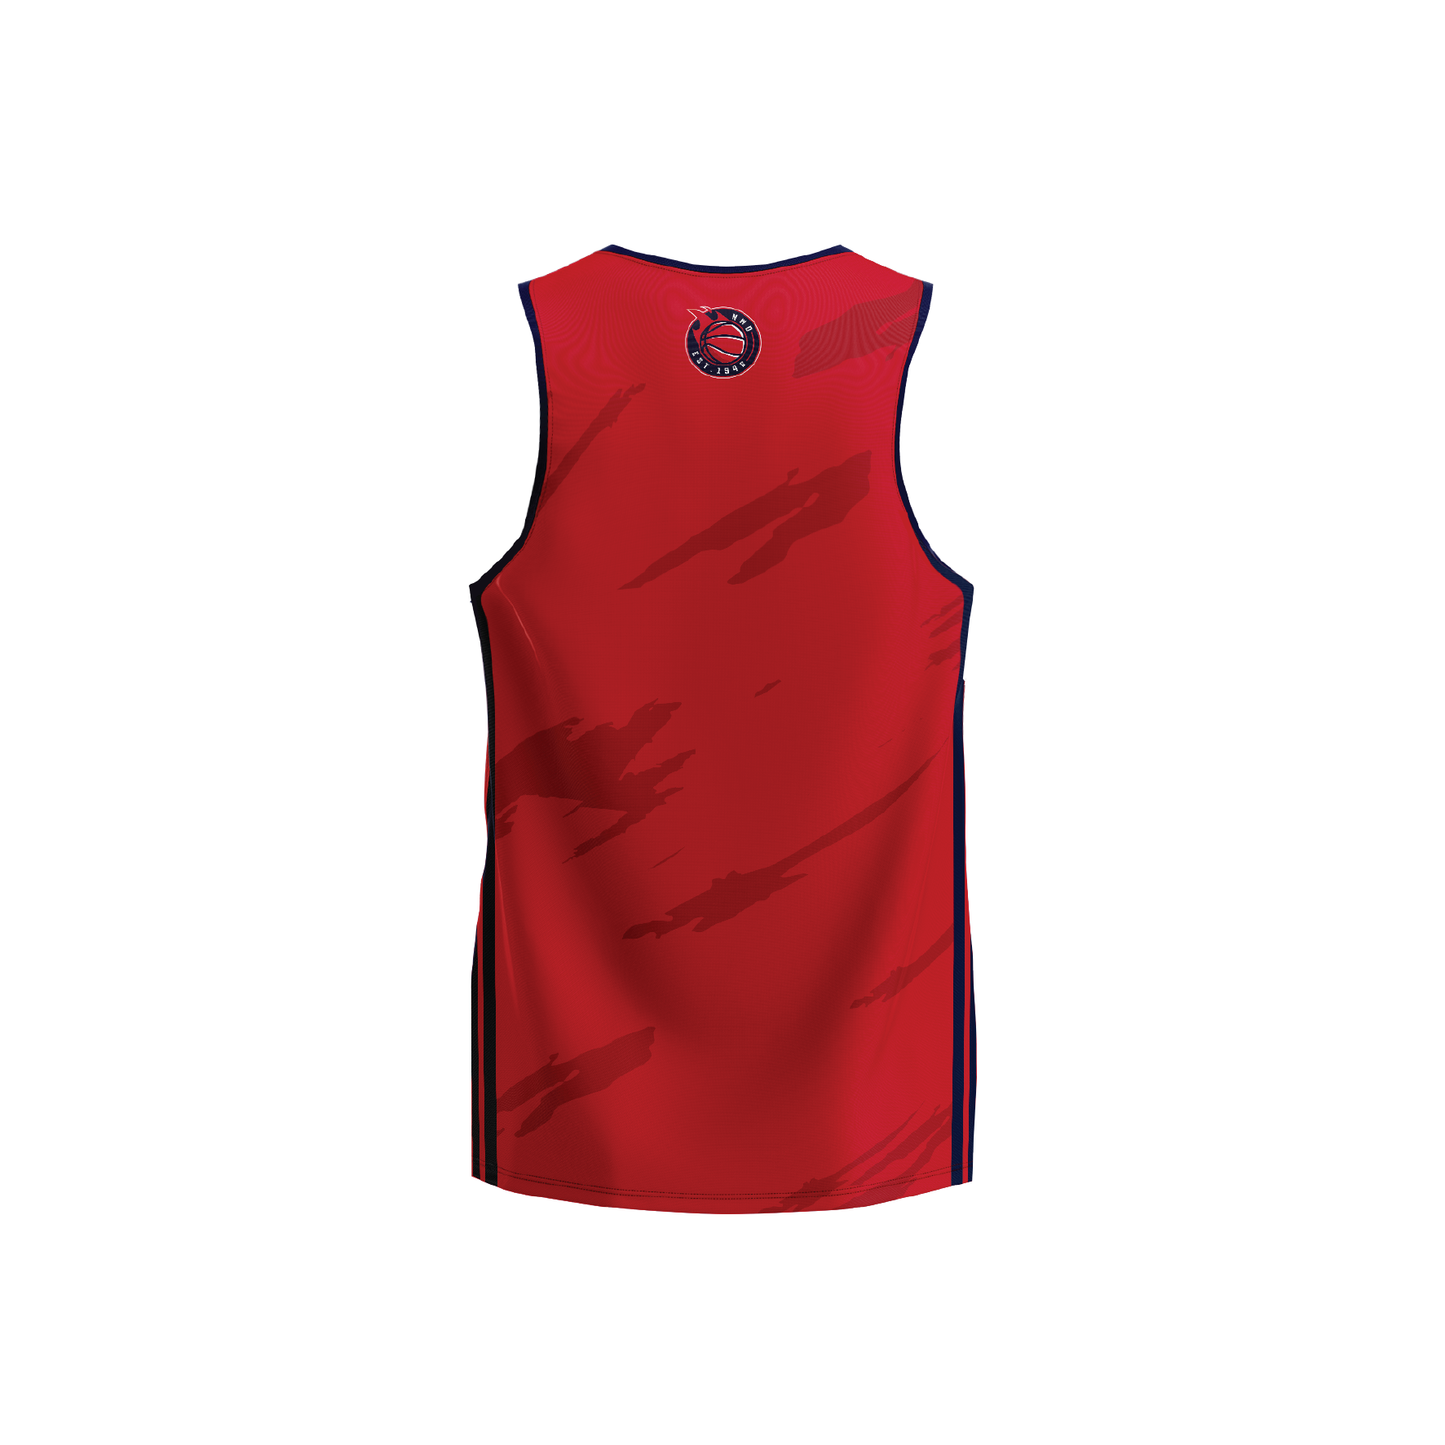 NORWOOD FLAMES CLUB PLAYER RUNNING SINGLET - RED